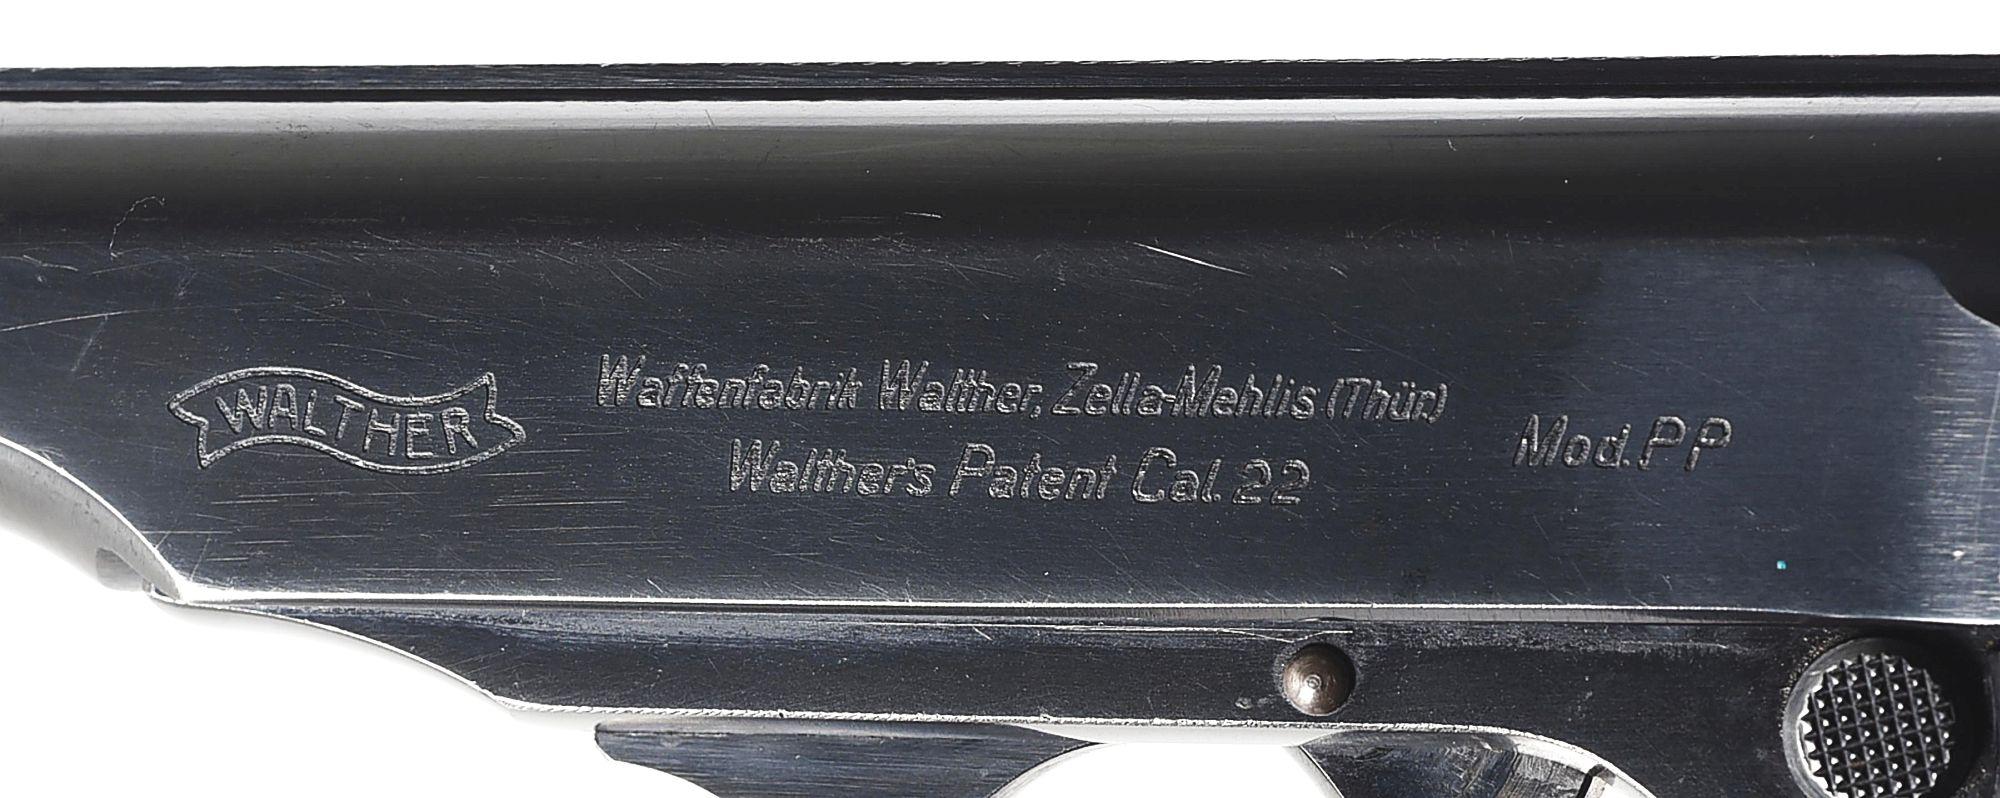 (C) VERY RARE SA MARKED WALTHER PP SEMI AUTOMATIC PISTOL IN .22 LR WITH HOLSTER.